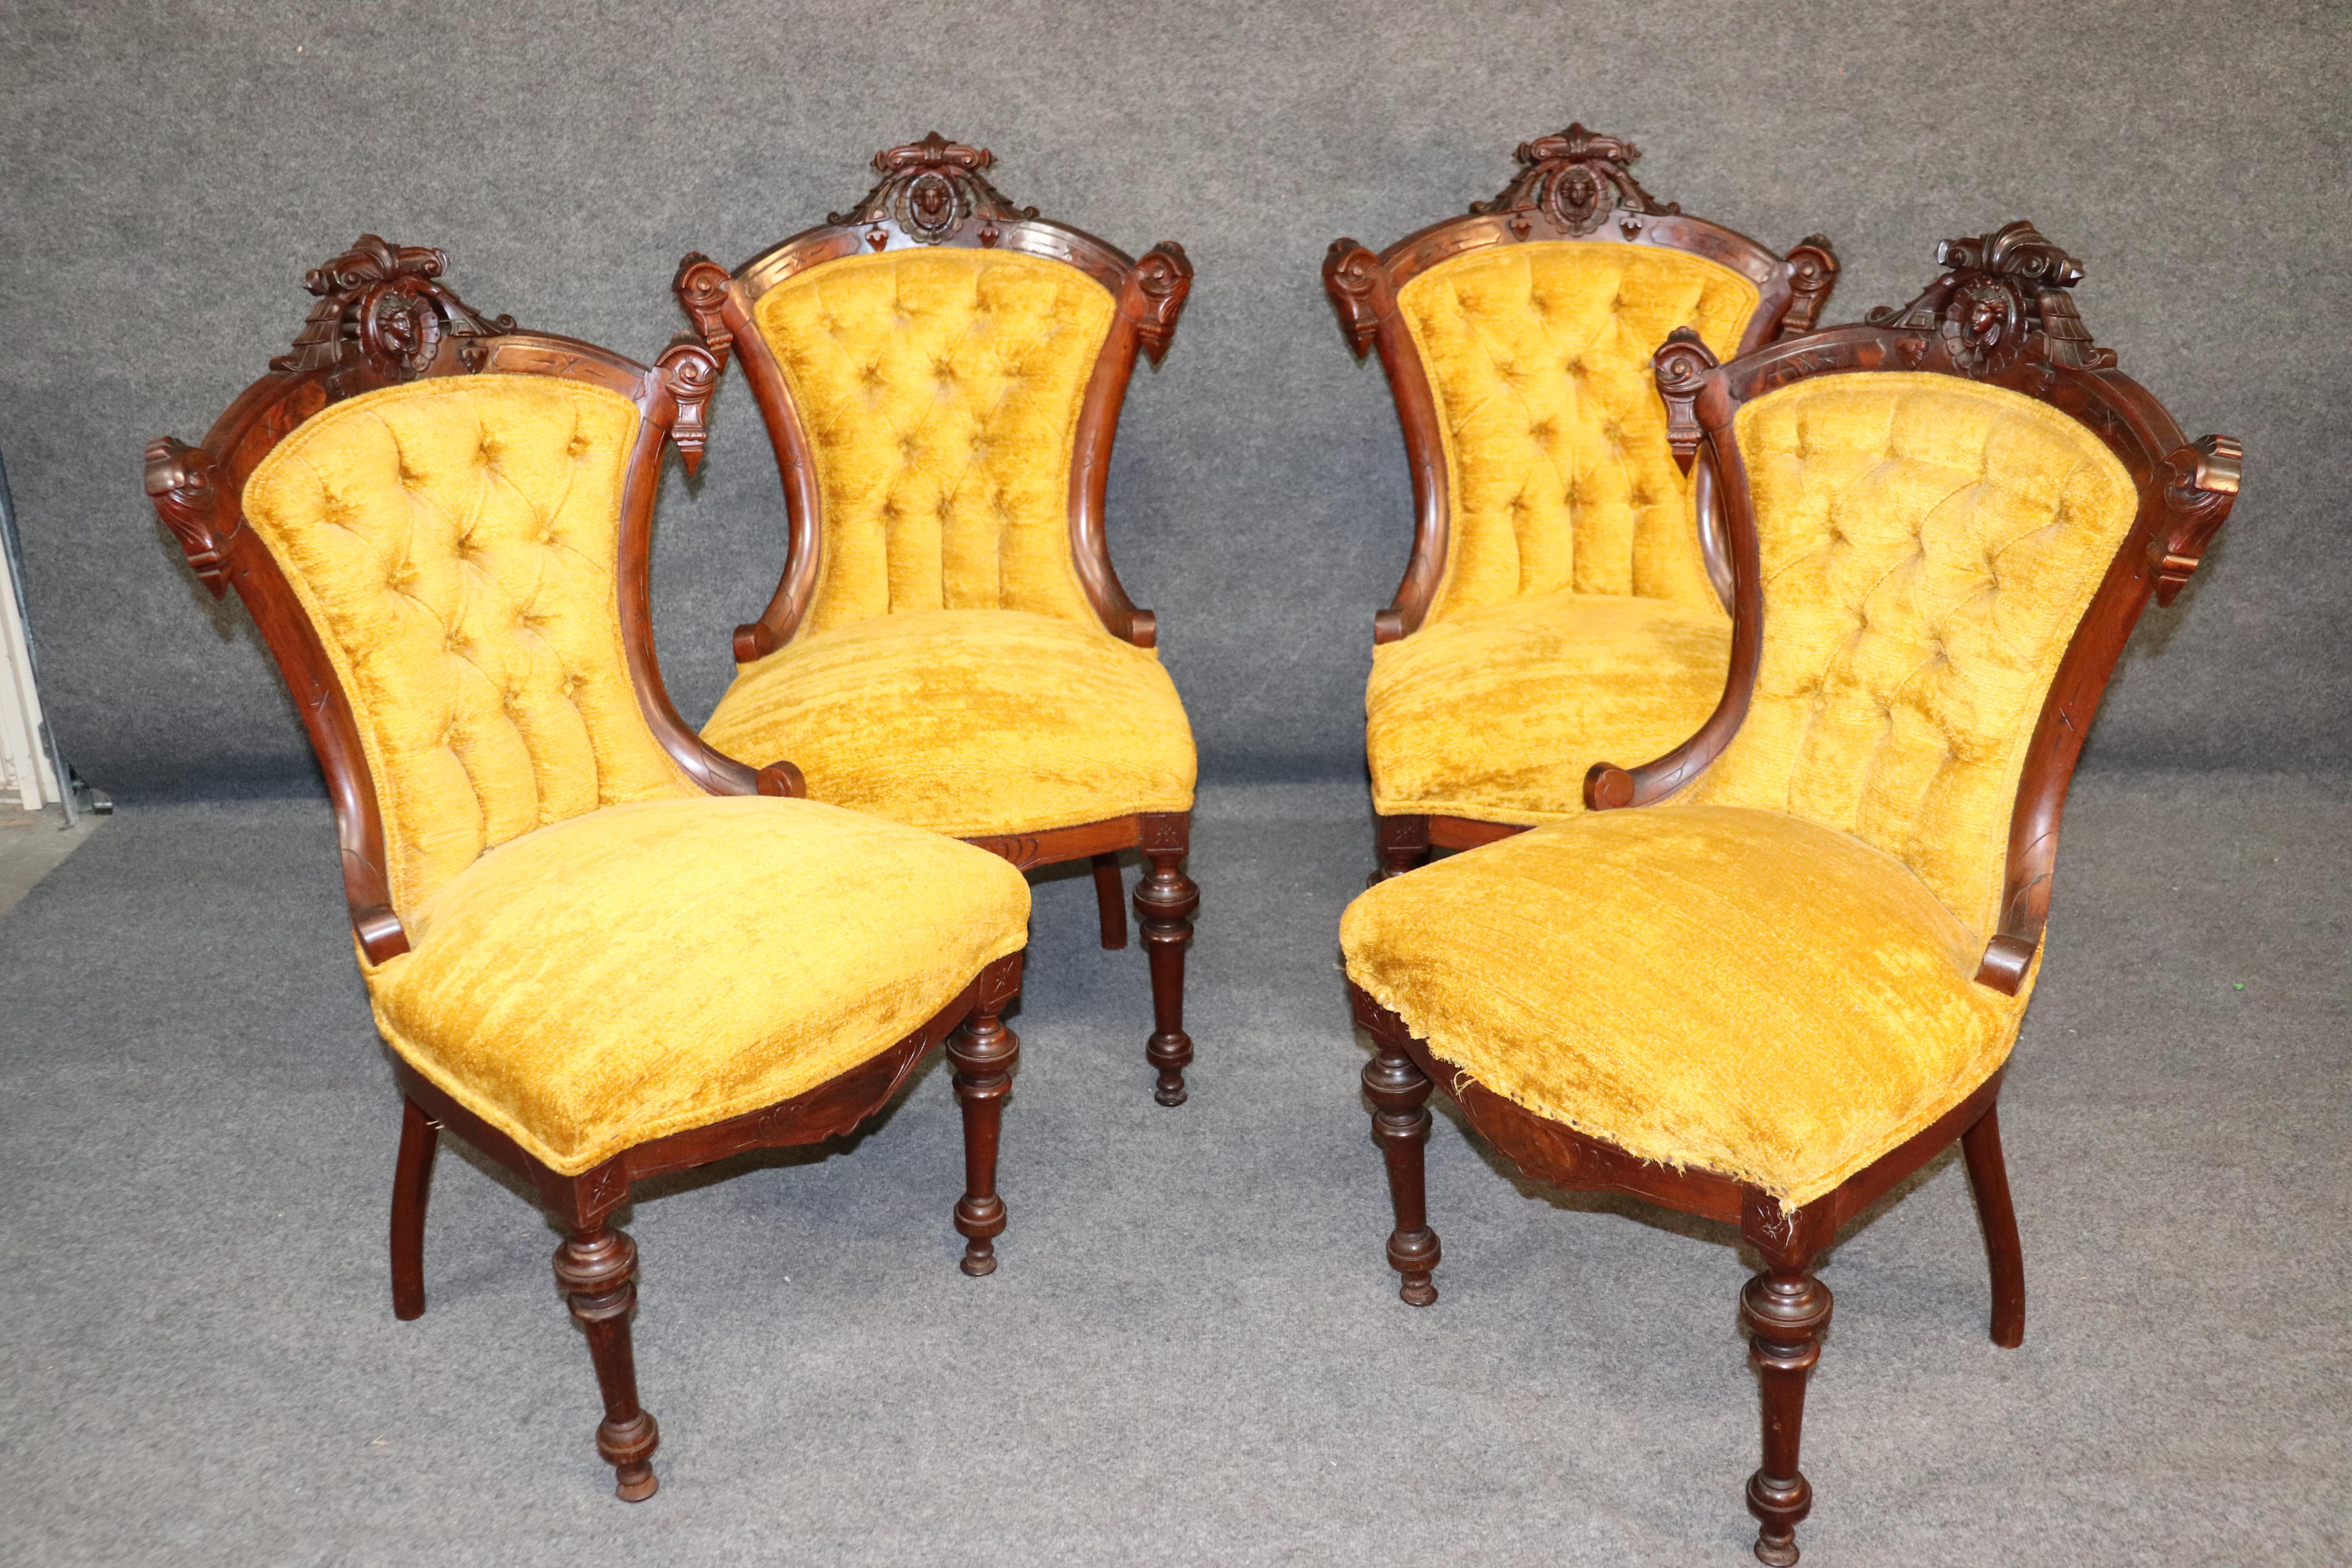 This is a rare 1870s era 7 piece John Jelliff parlor set with 4 side chairs, 2 armchairs and a matching sofa. As was customary during the earlier 20th century, pieces were often upholstered in different fabrics. These are all a matched set from the